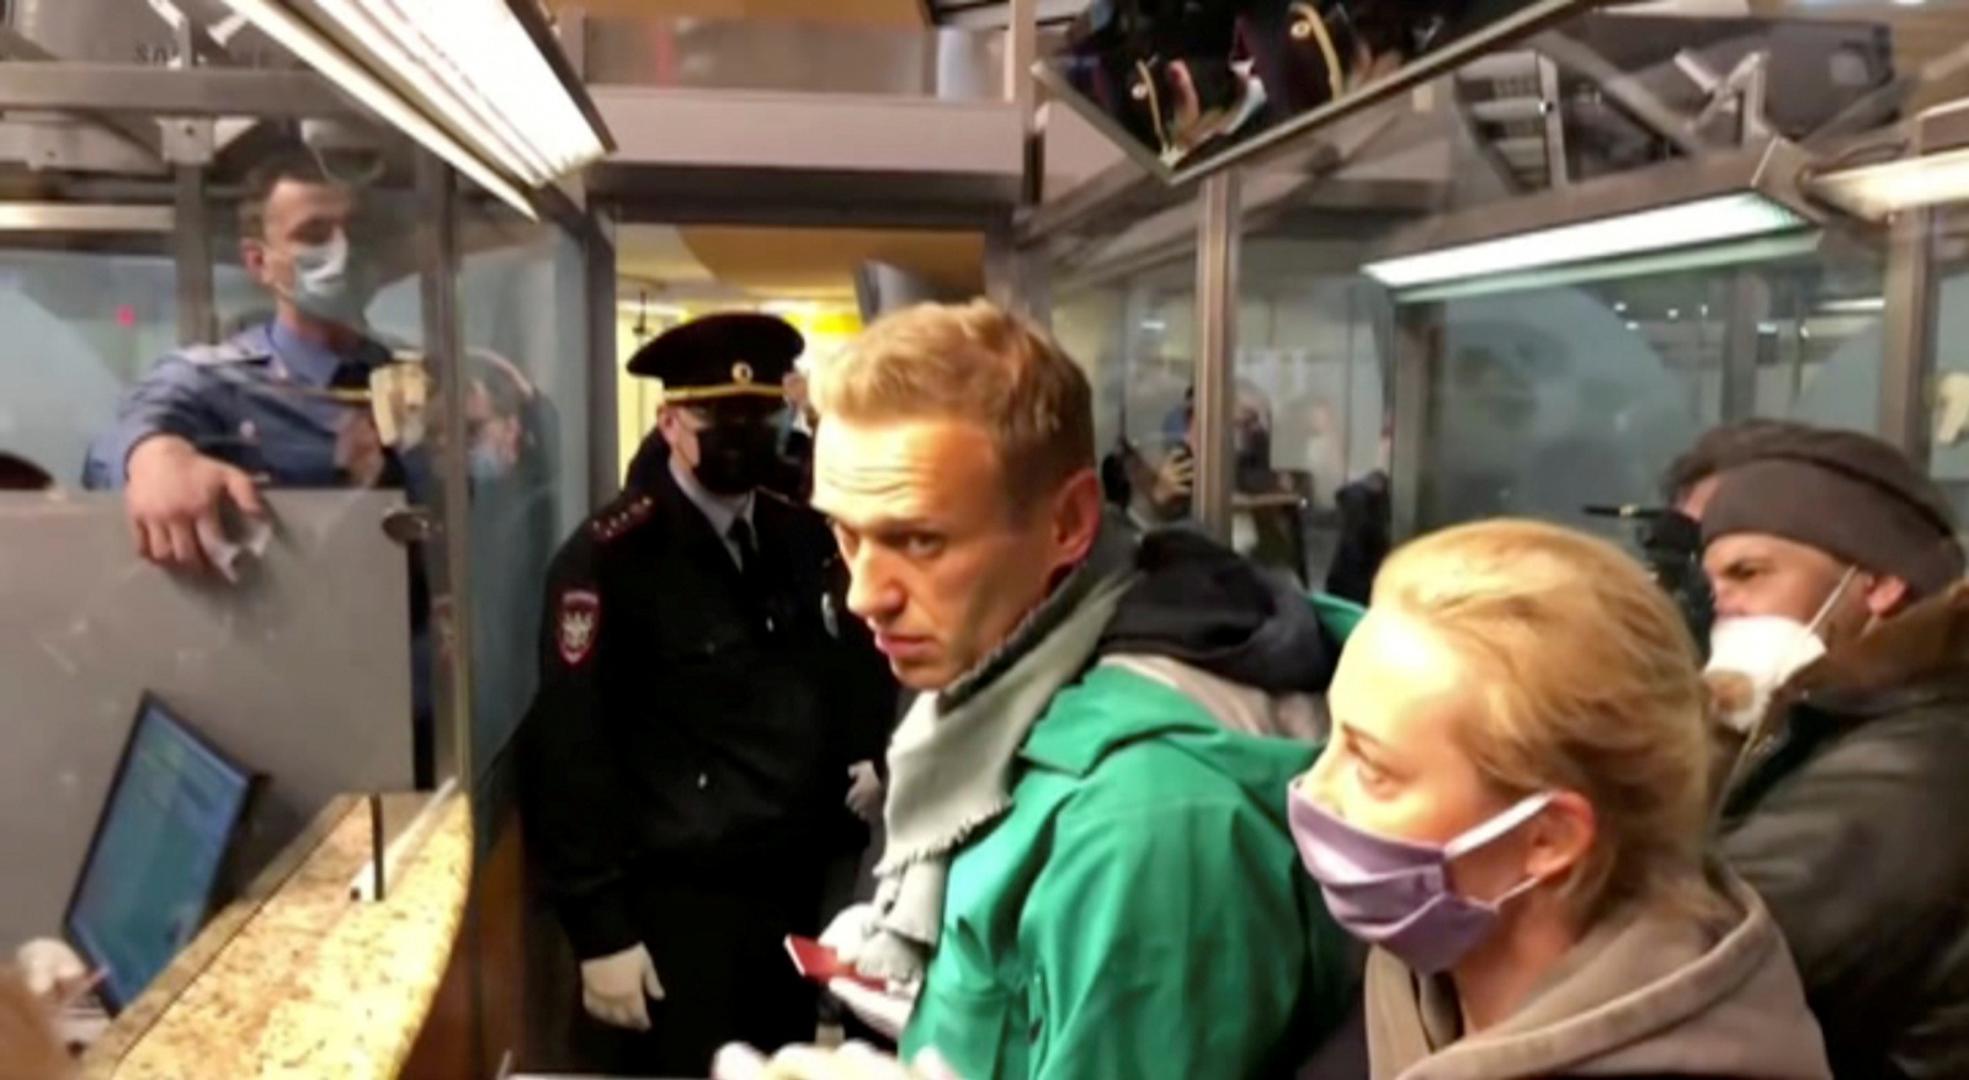 FILE PHOTO: Police officers detain Russian opposition leader Alexei Navalny in Moscow FILE PHOTO: A still image taken from video footage shows law enforcement officers speaking with Russian opposition leader Alexei Navalny before leading him away at Sheremetyevo airport in Moscow, Russia January 17, 2021. REUTERS/Reuters TV/File Photo REUTERS TV